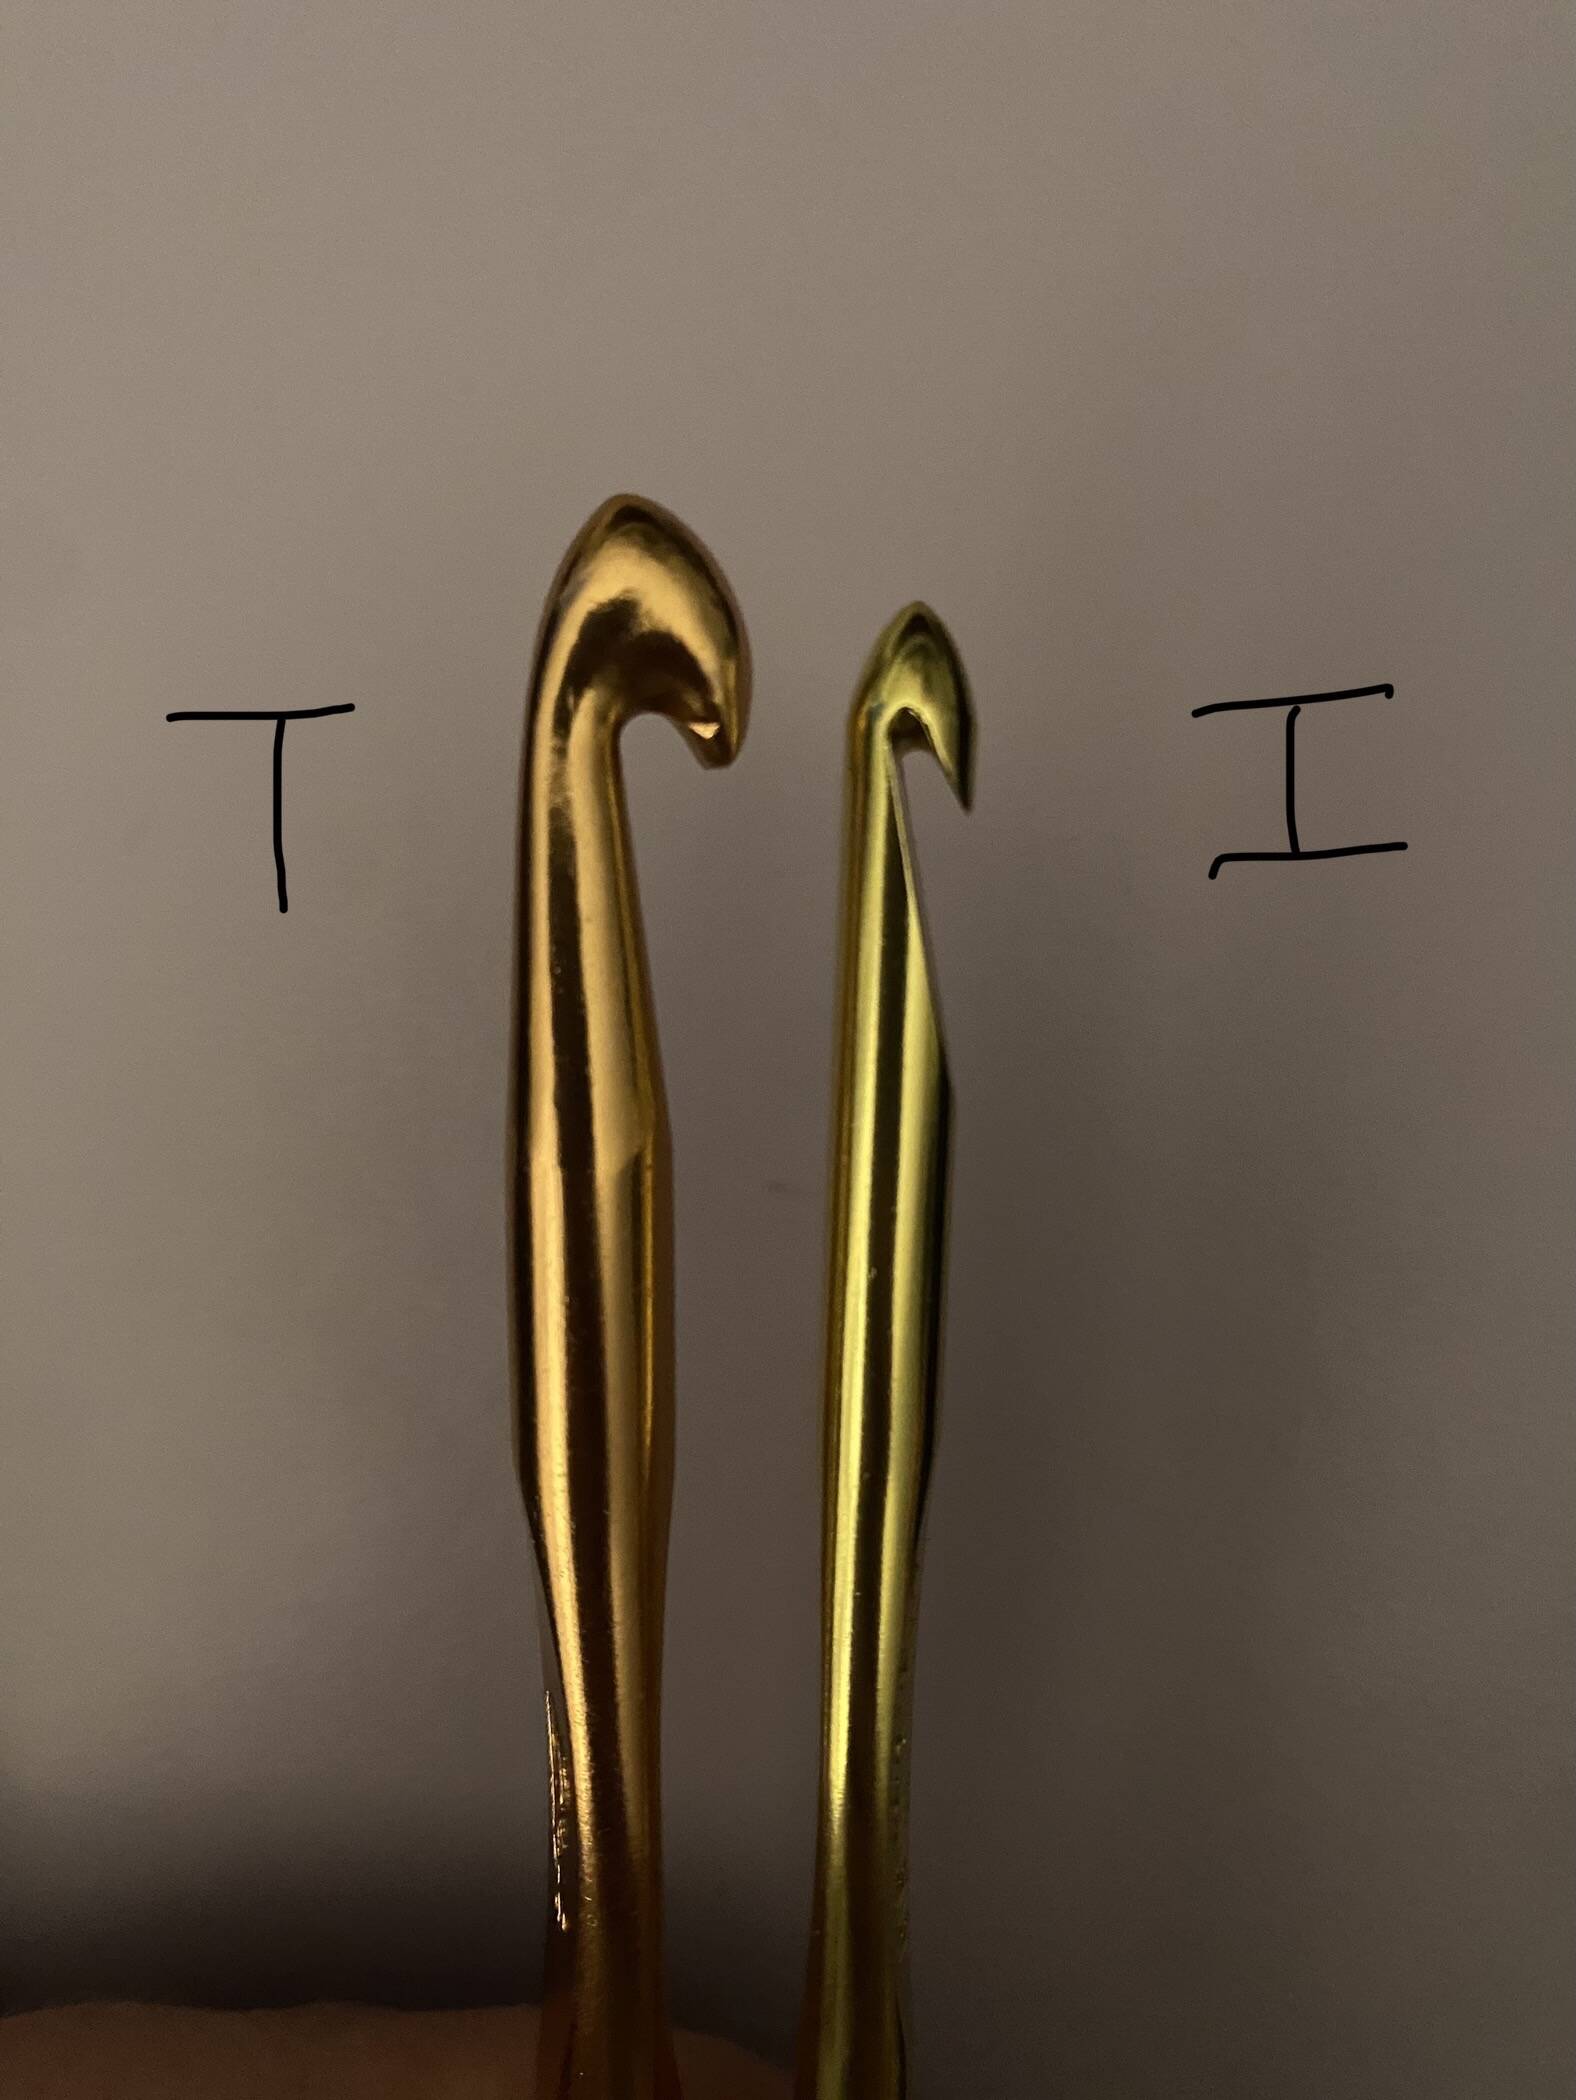 How Inline and Tapered Hooks Compare - Is One Better?